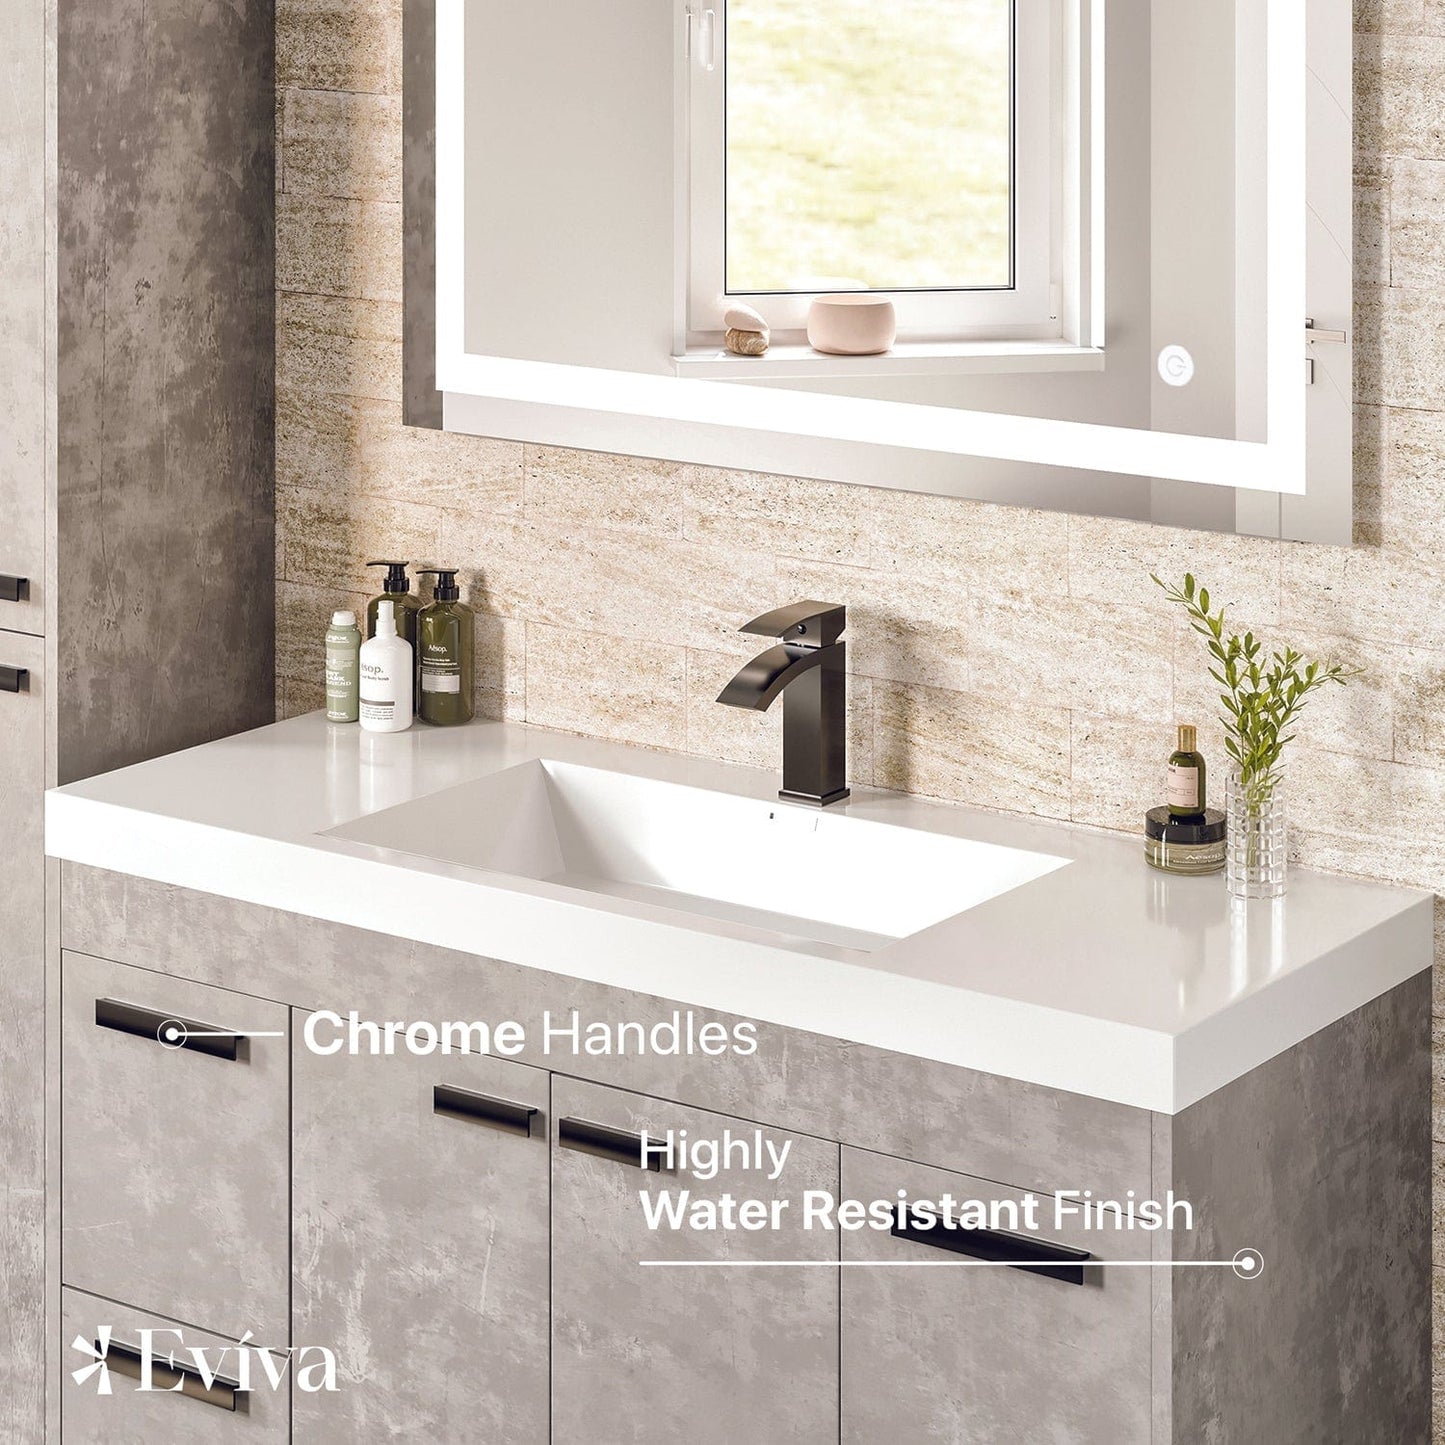 Eviva Lugano 42" Cement Gray Modern Bathroom Vanity with White Integrated Top